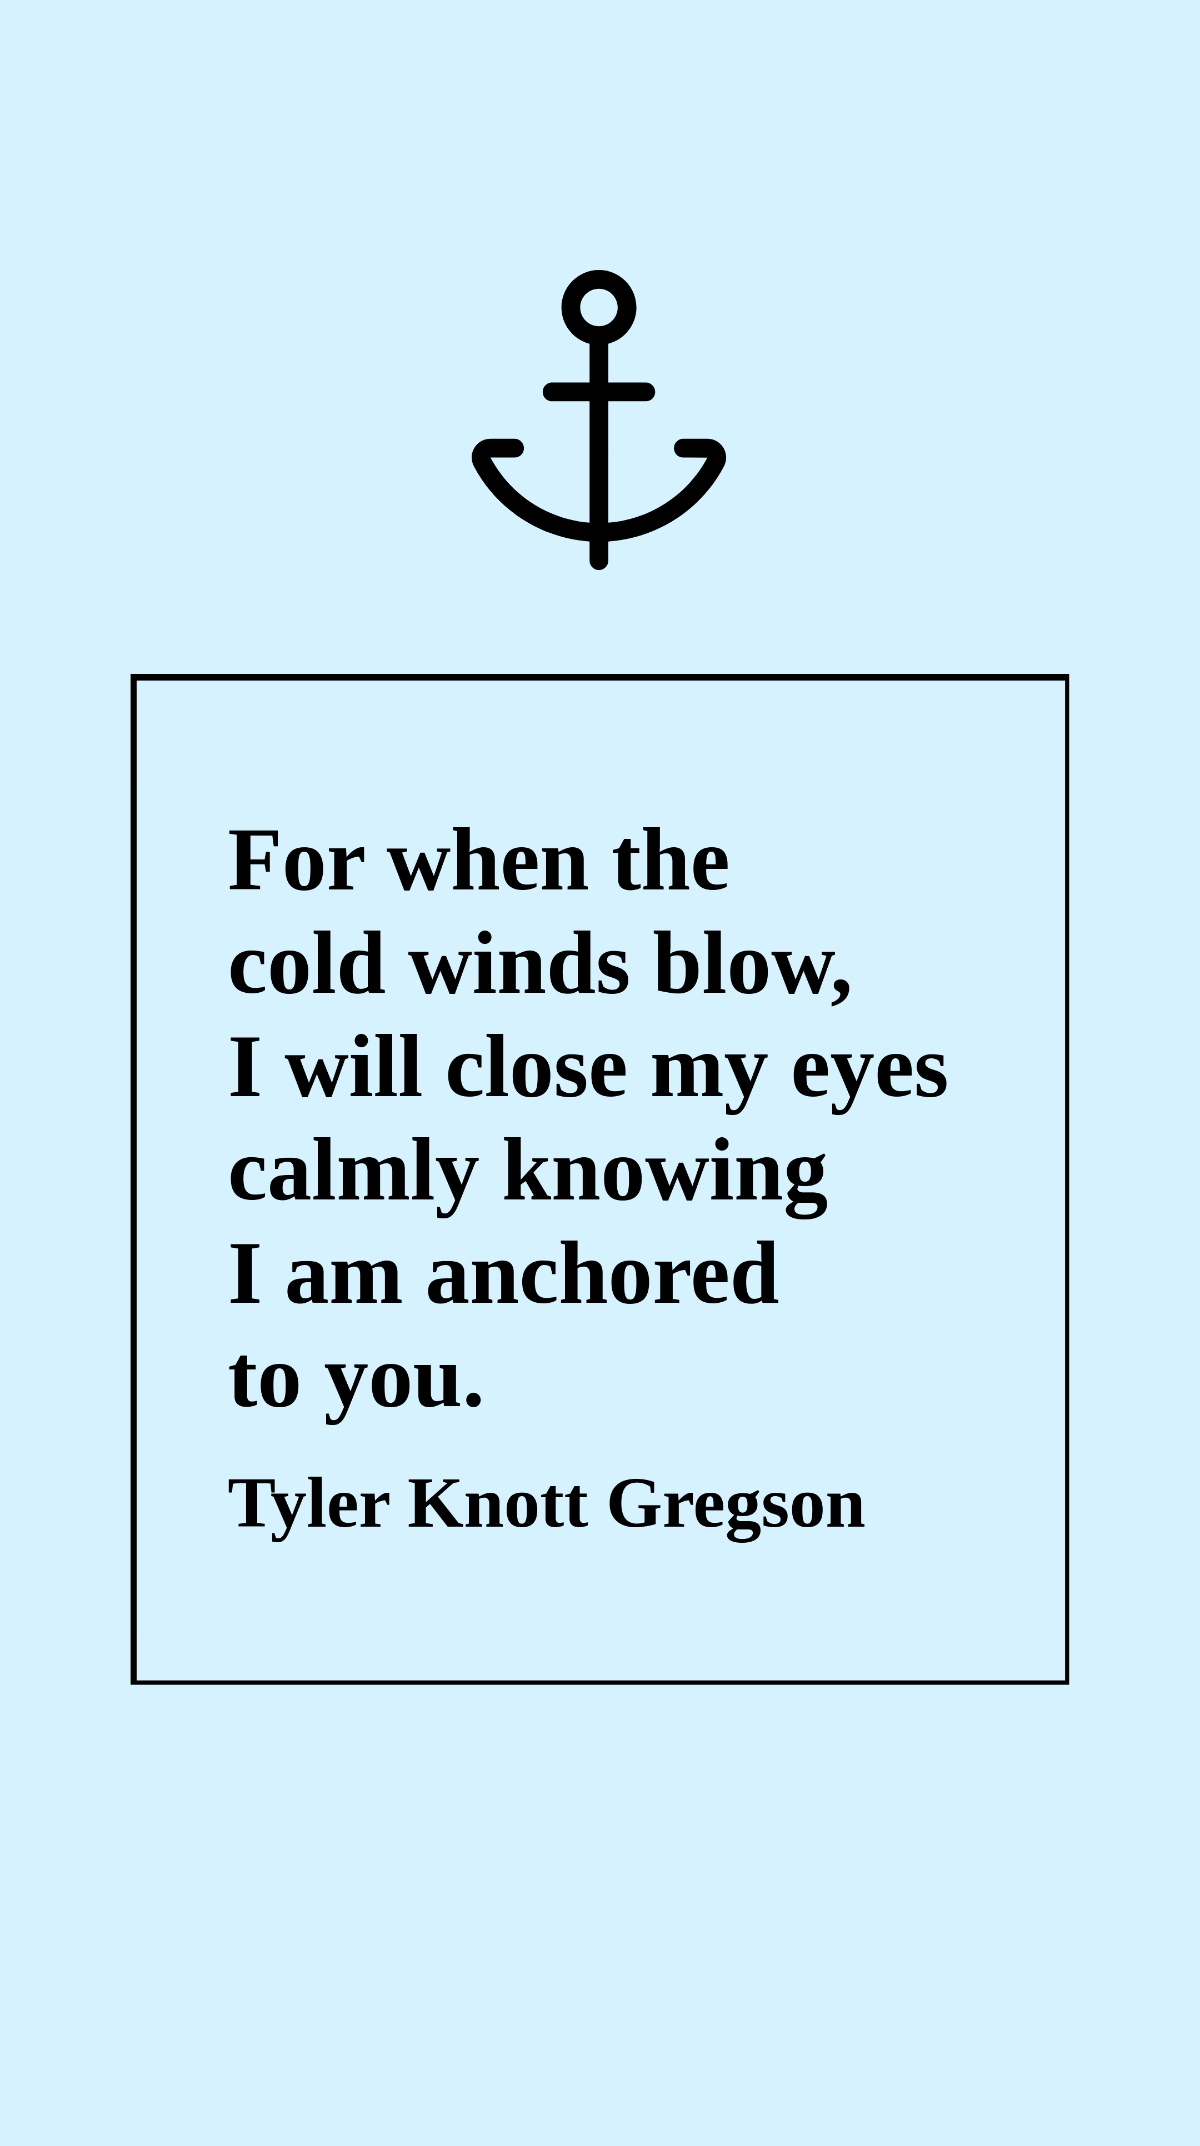 Tyler Knott Gregson - For when the cold winds blow, I will close my eyes calmly knowing I am anchored to you. Template